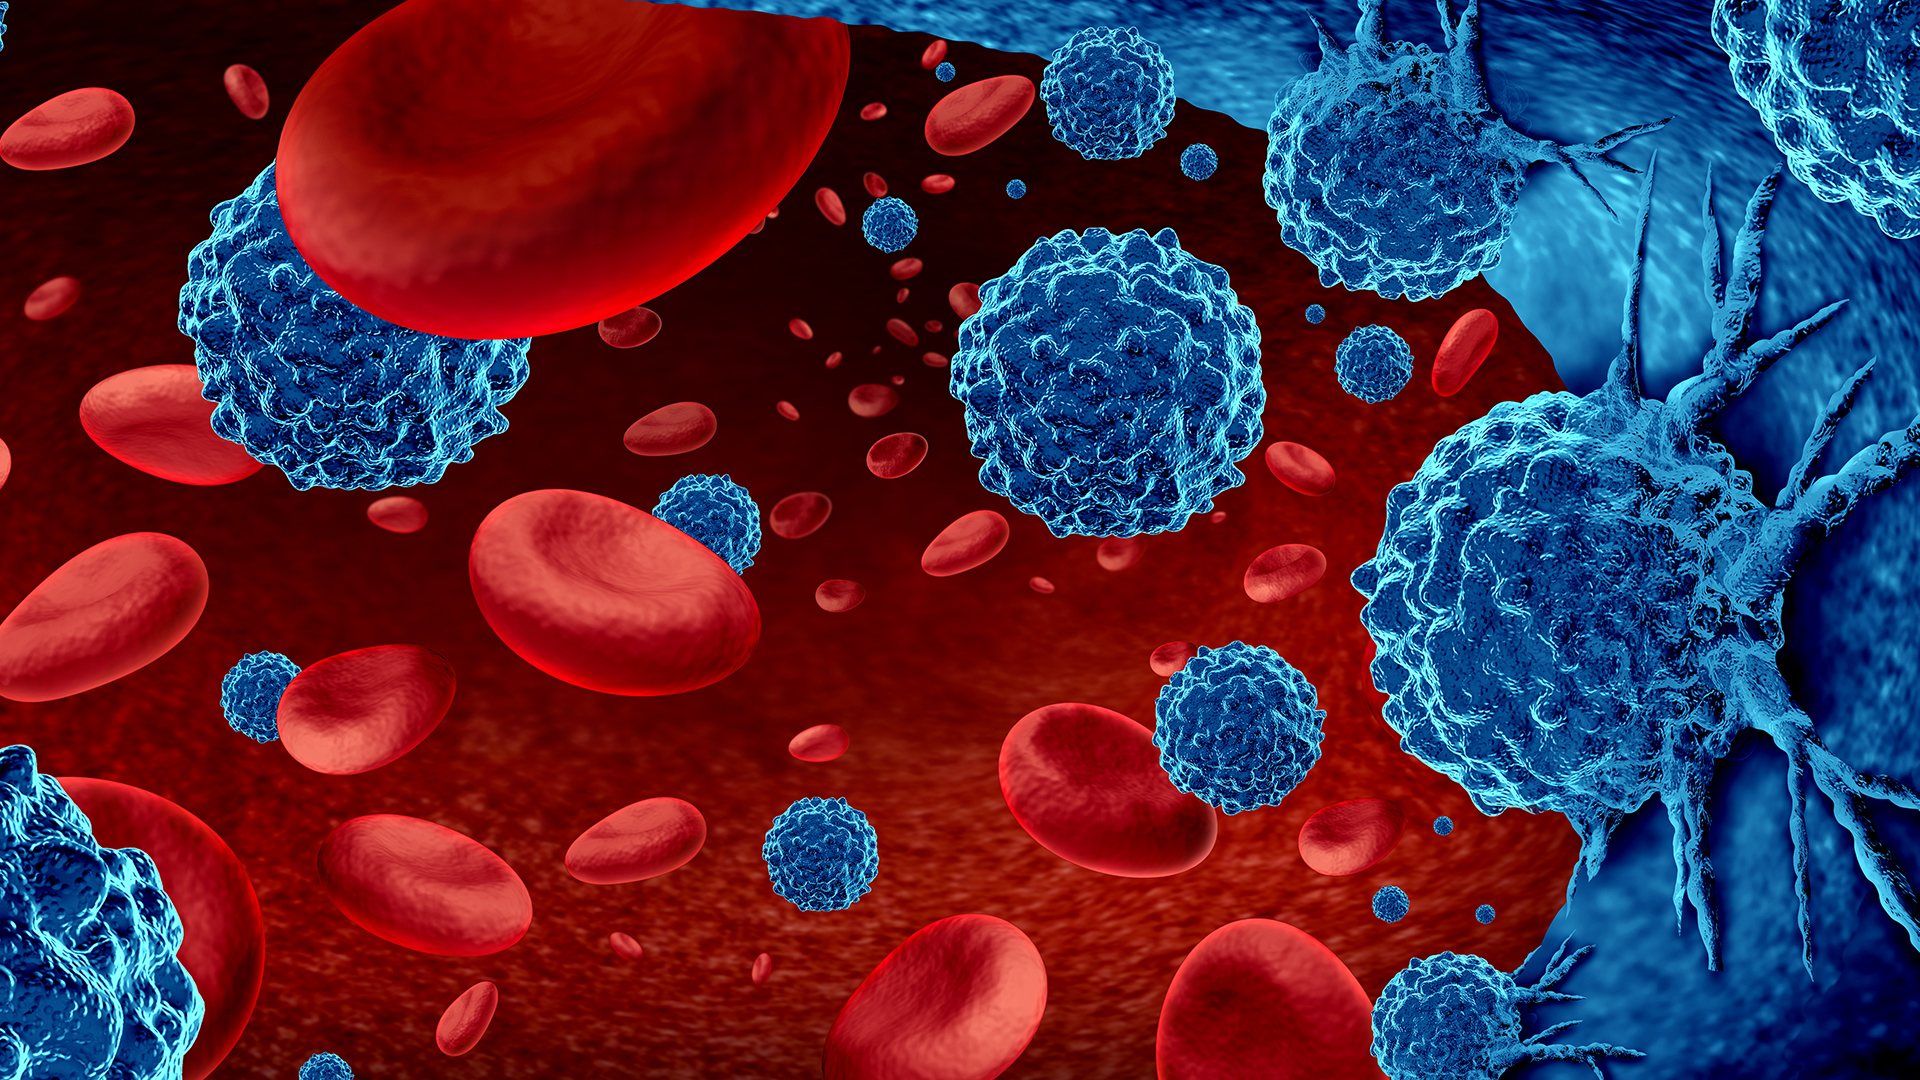 An existing drug could provide a potent treatment for acute leukaemia